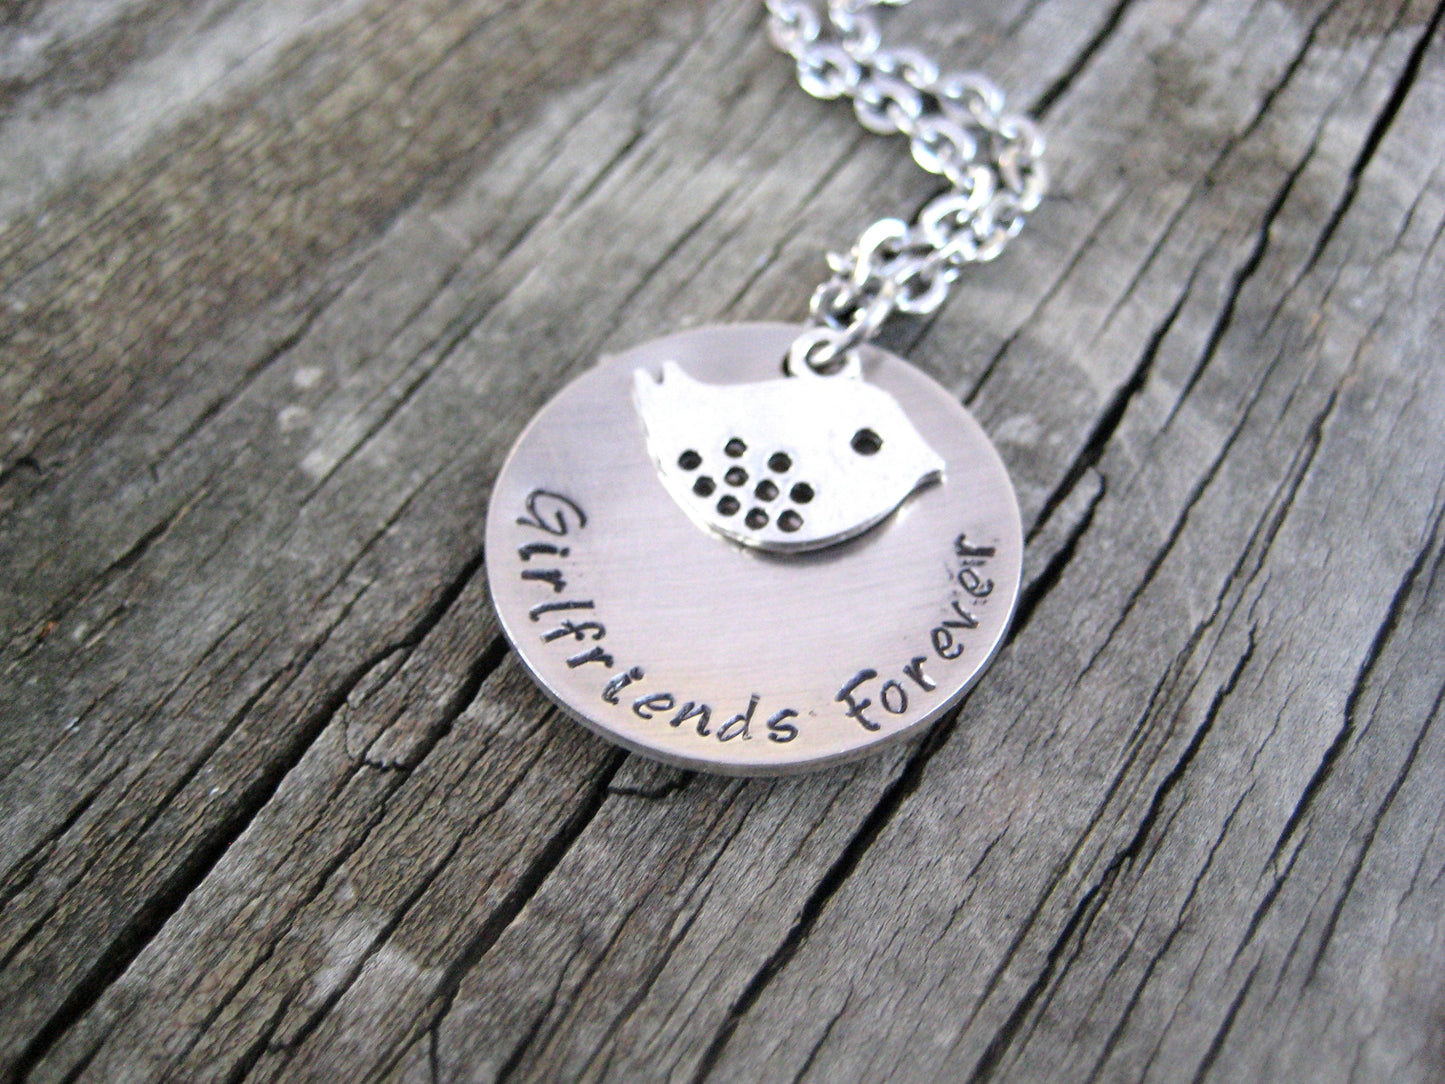 Personalized Necklace, Personalized Jewelry, Personalized Gift, Bird Jewelry Gift, Bird Necklace, Birthday Gift, Friend Gift